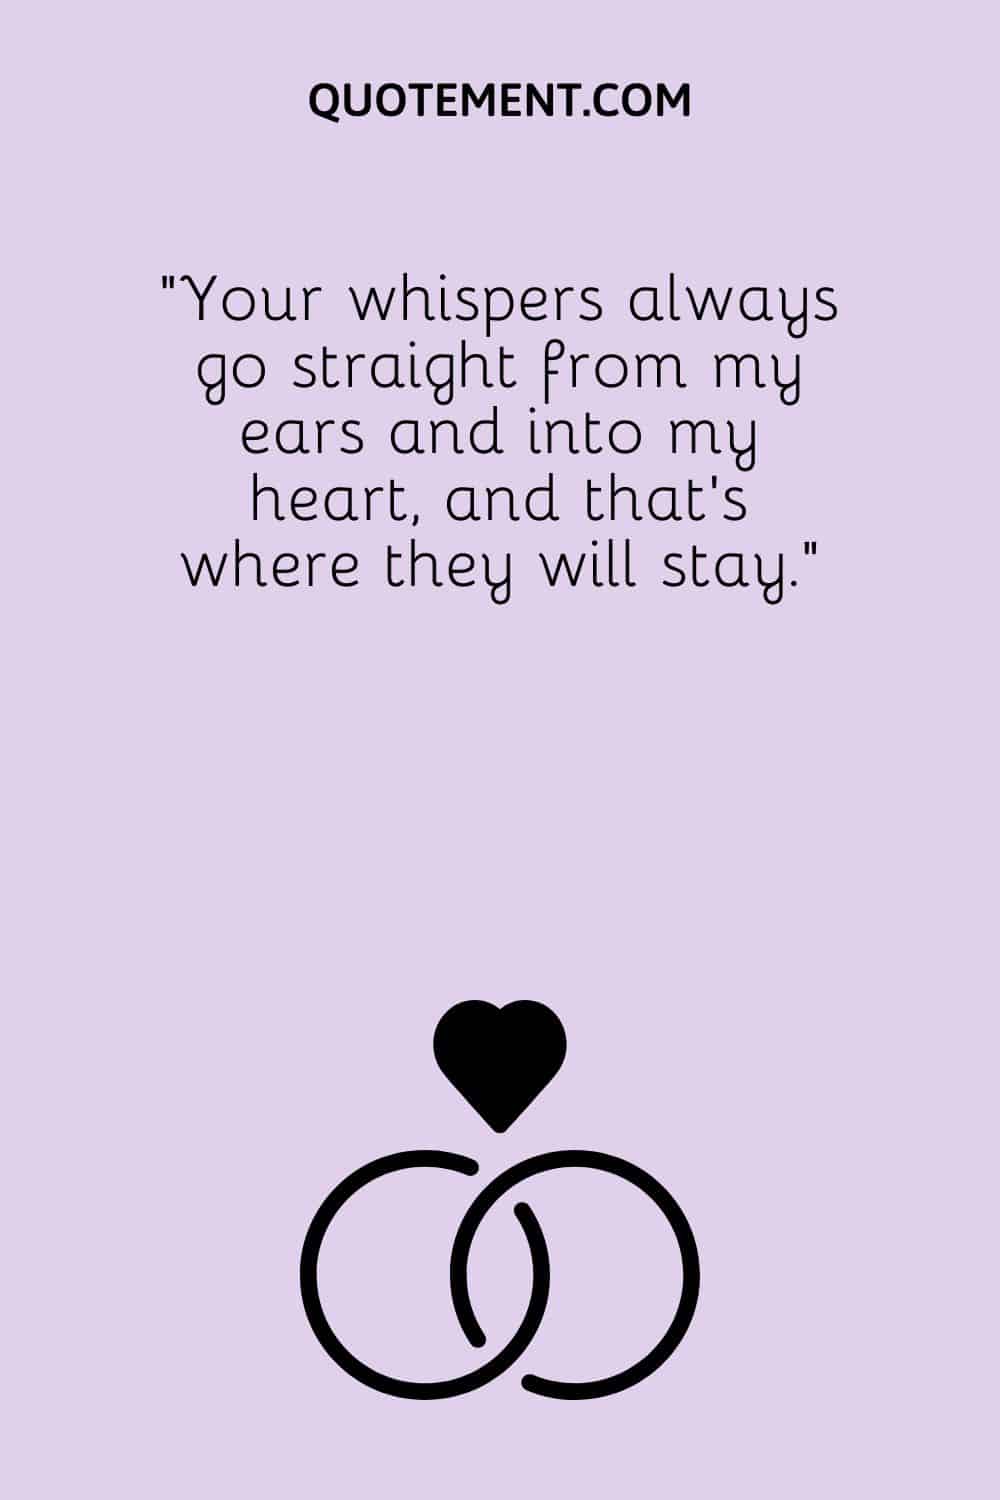 Your whispers always go straight from my ears and into my heart, and that’s where they will stay.